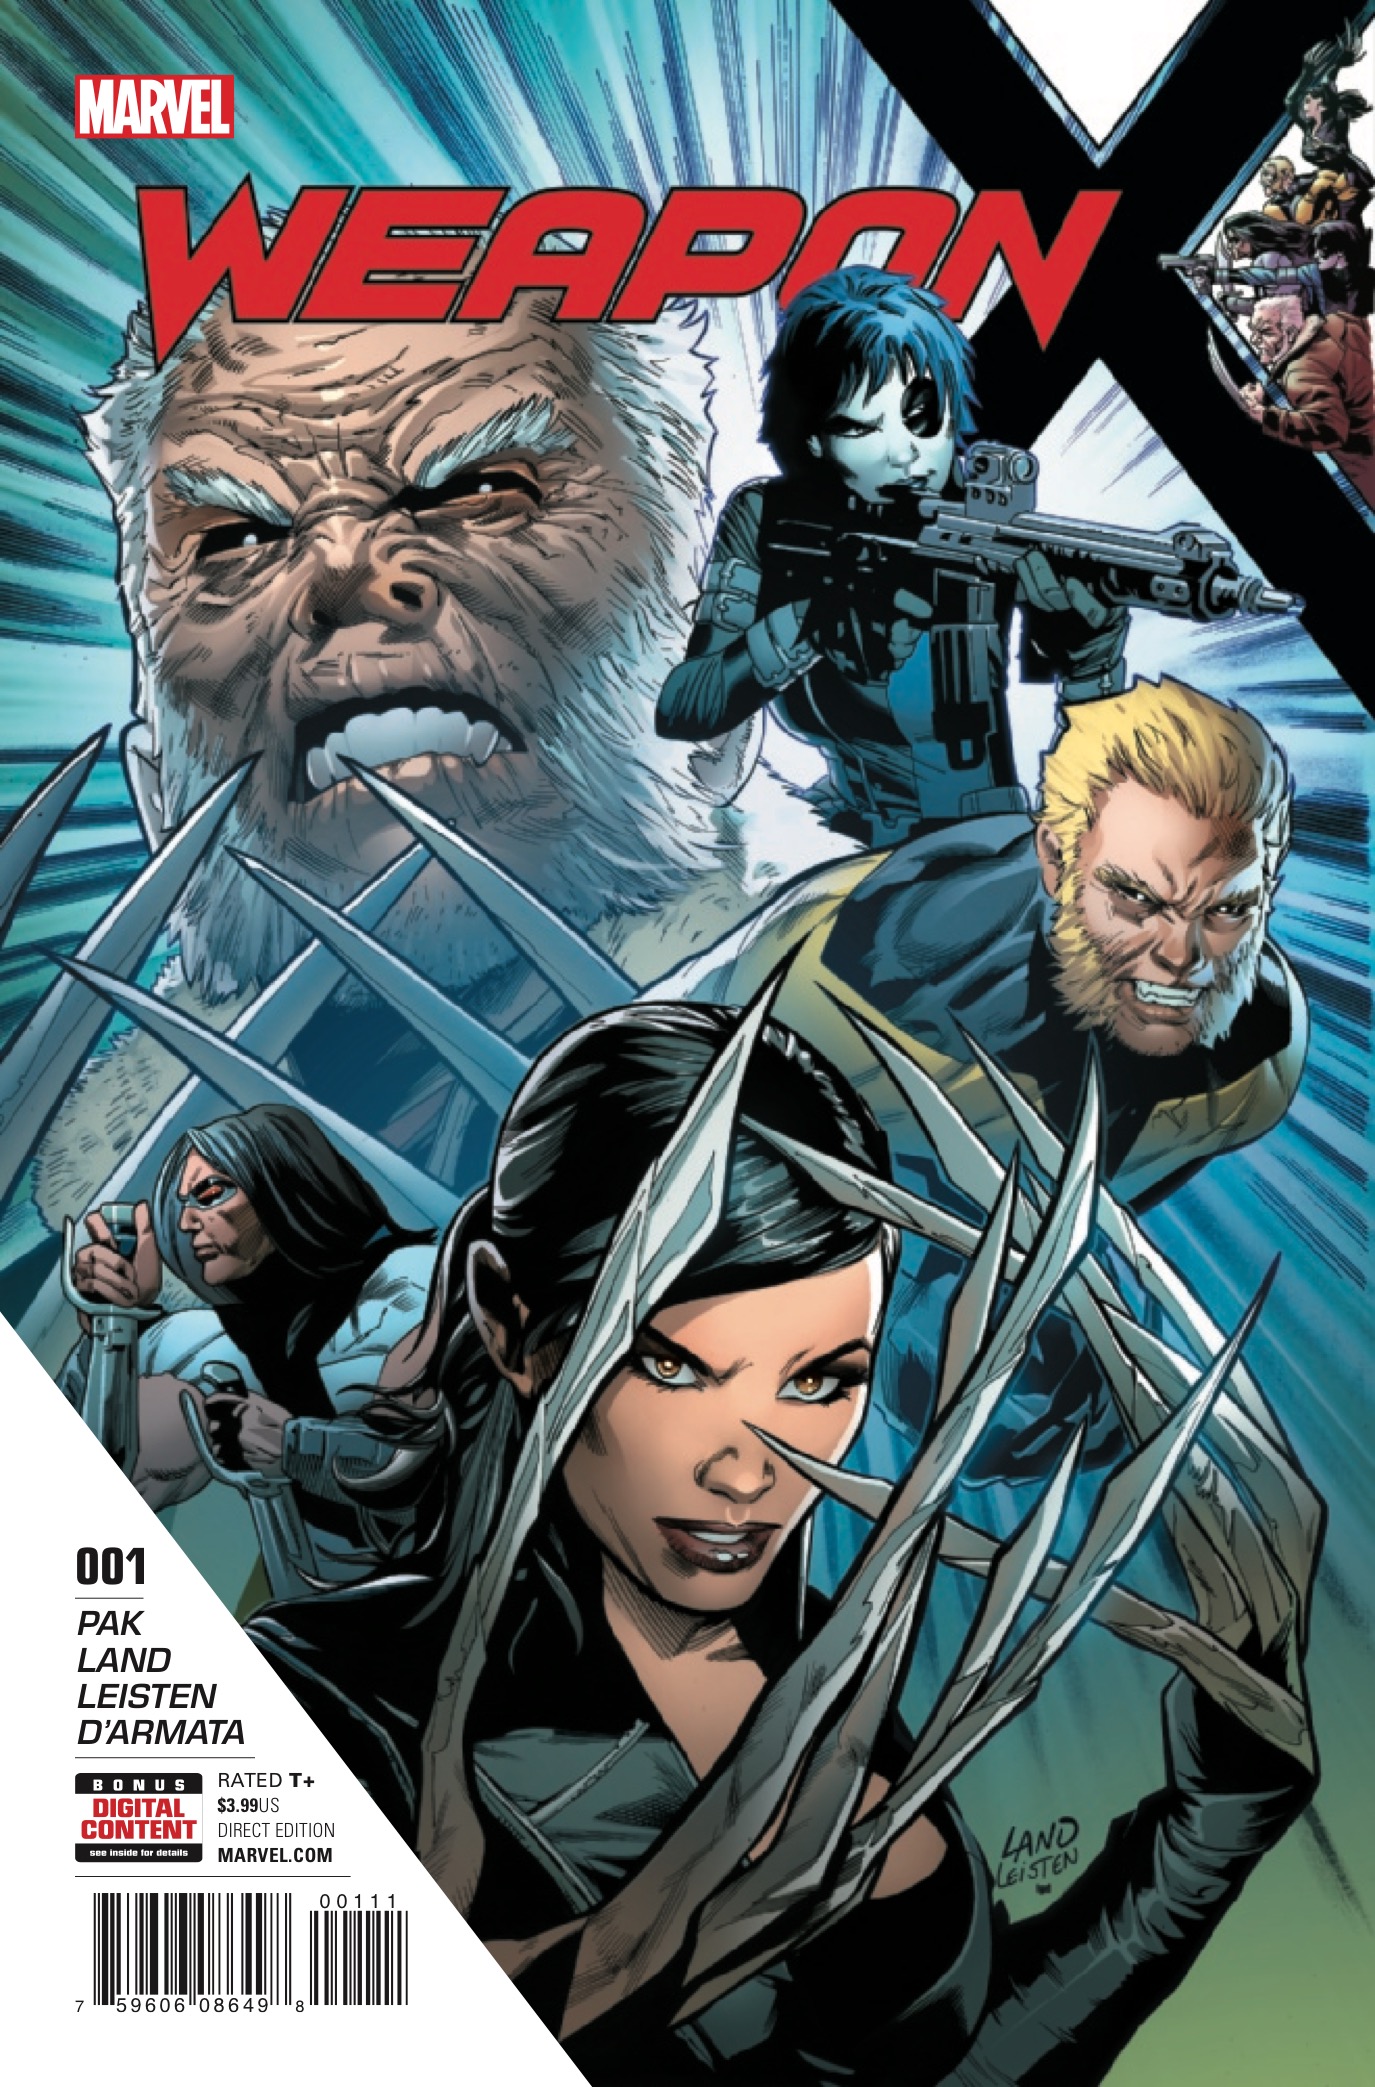 Weapon X #1 Review